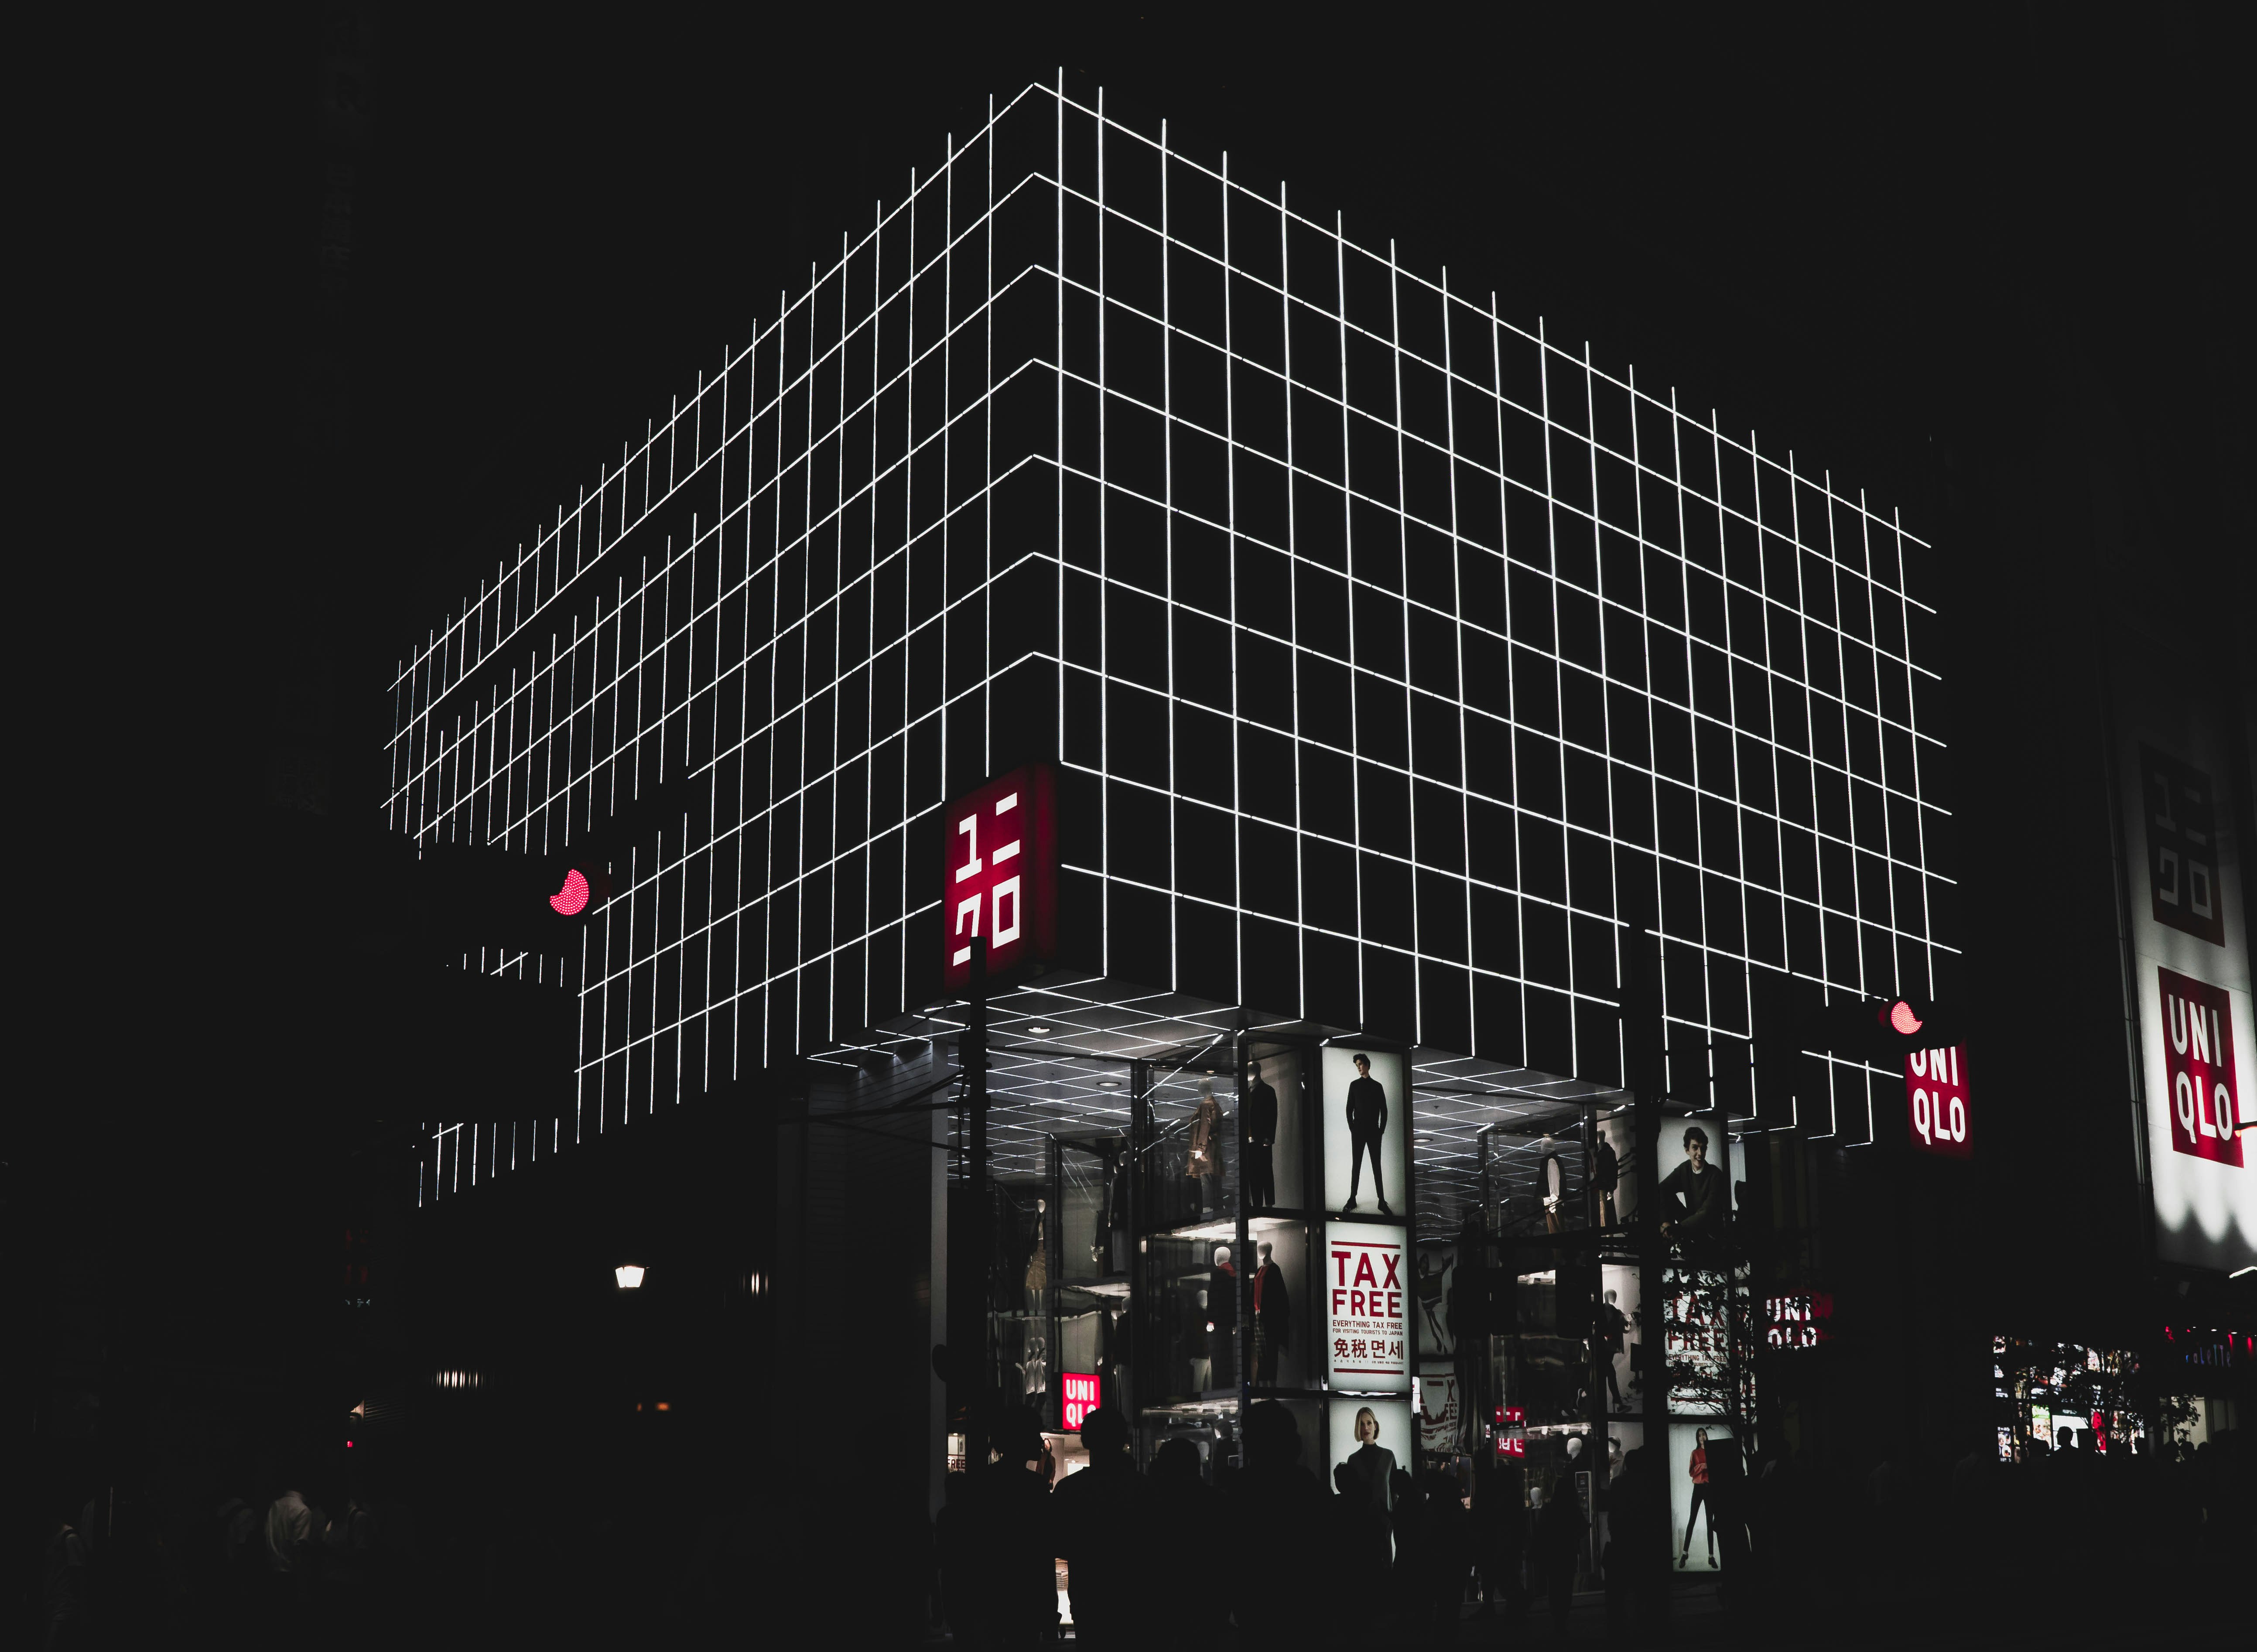 building with billboards at night